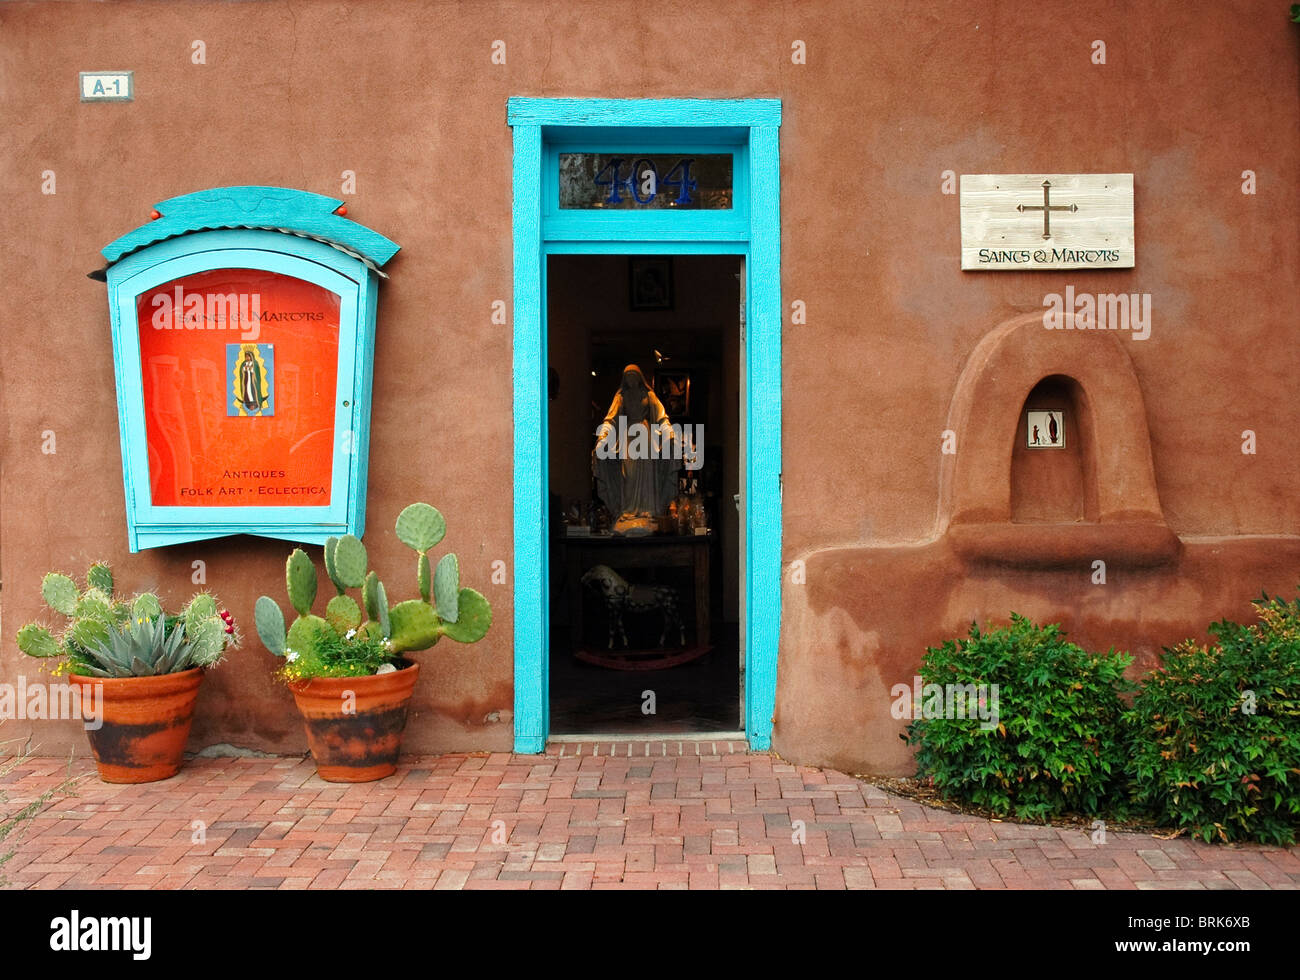 Shop for religious articles in Old Town section of Albuquerque, NM. Stock Photo